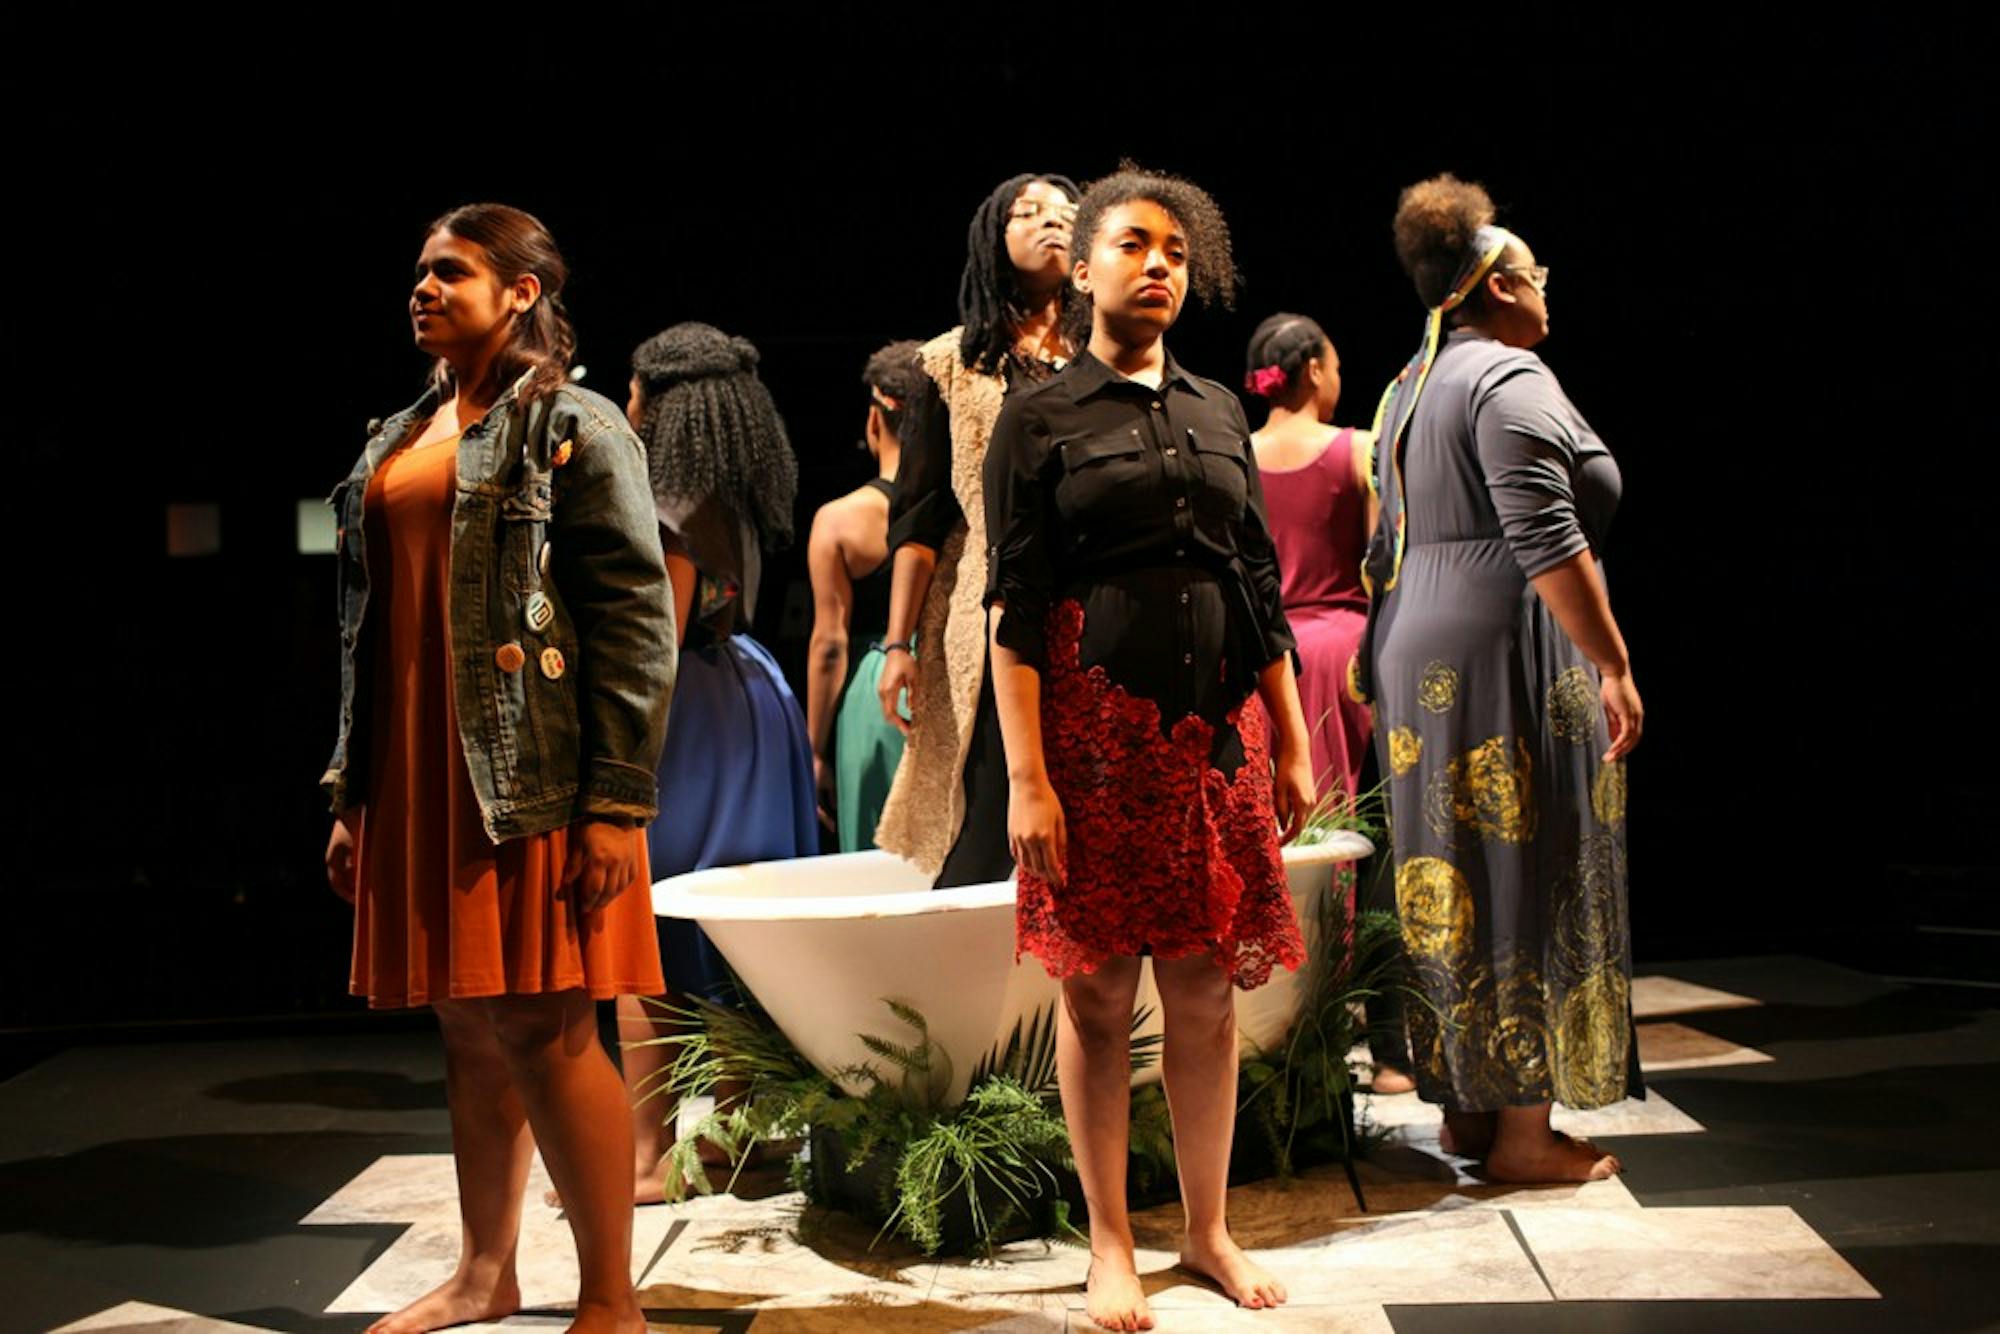 Dress rehearsal of For Colored Girls Who Have Considered Suicide / When the Rainbow Is Enuf in Hanover, New Hampshire on Thursday, May 12, 2016. Copyright 2016 Rob Strong